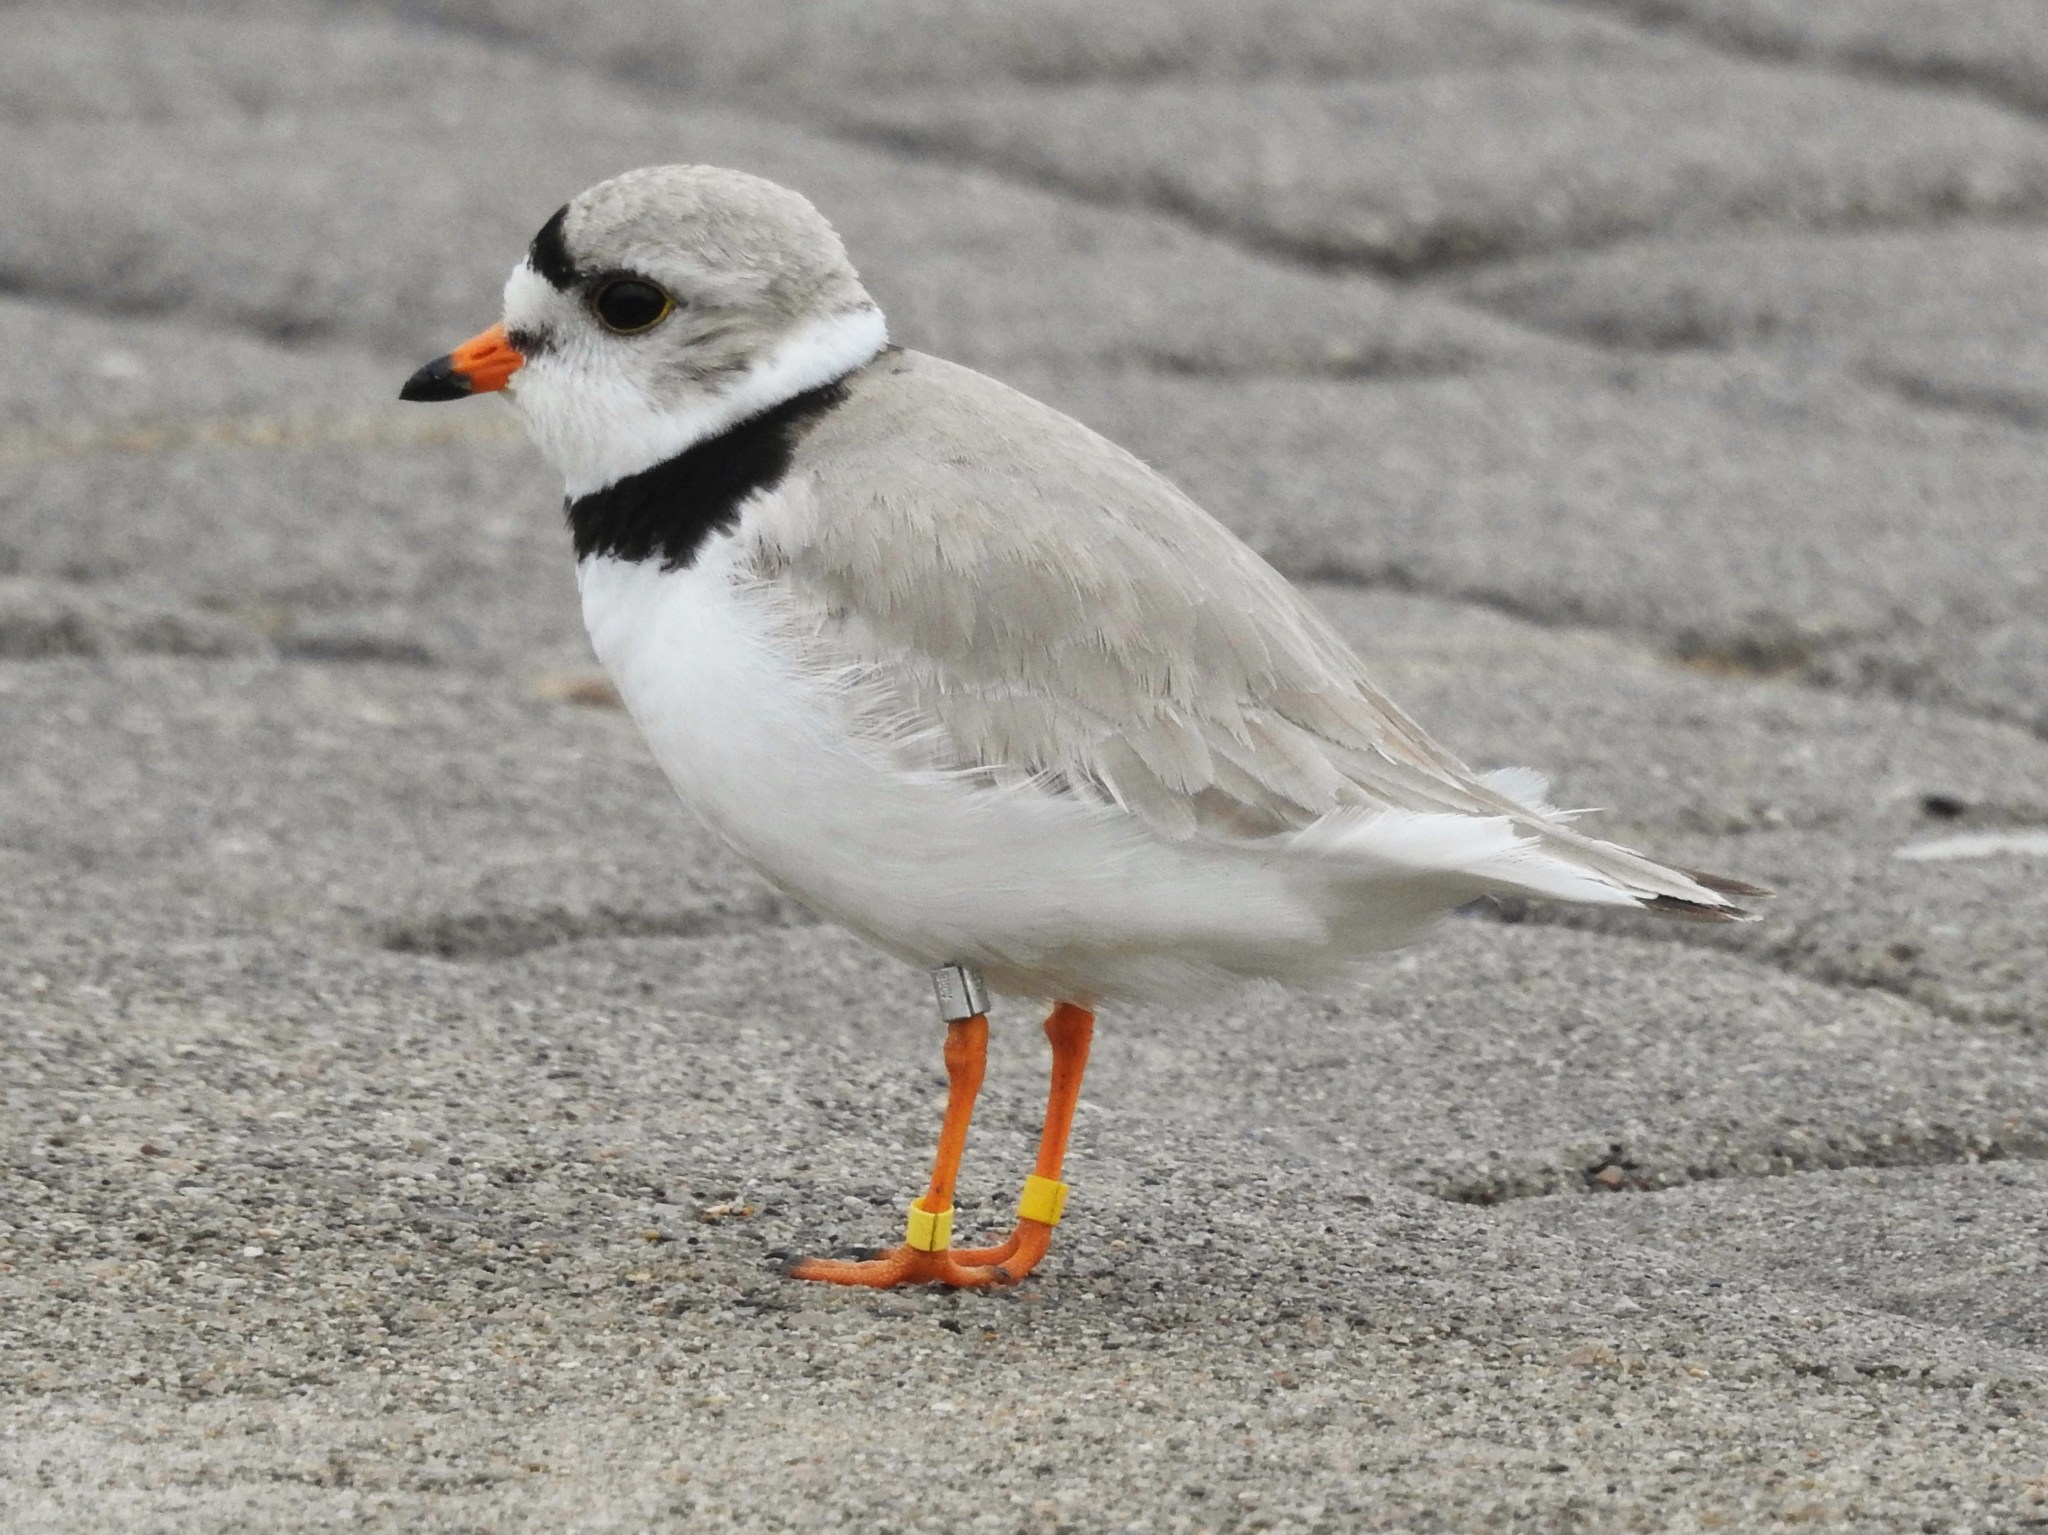 A photograph of the Piping Plover